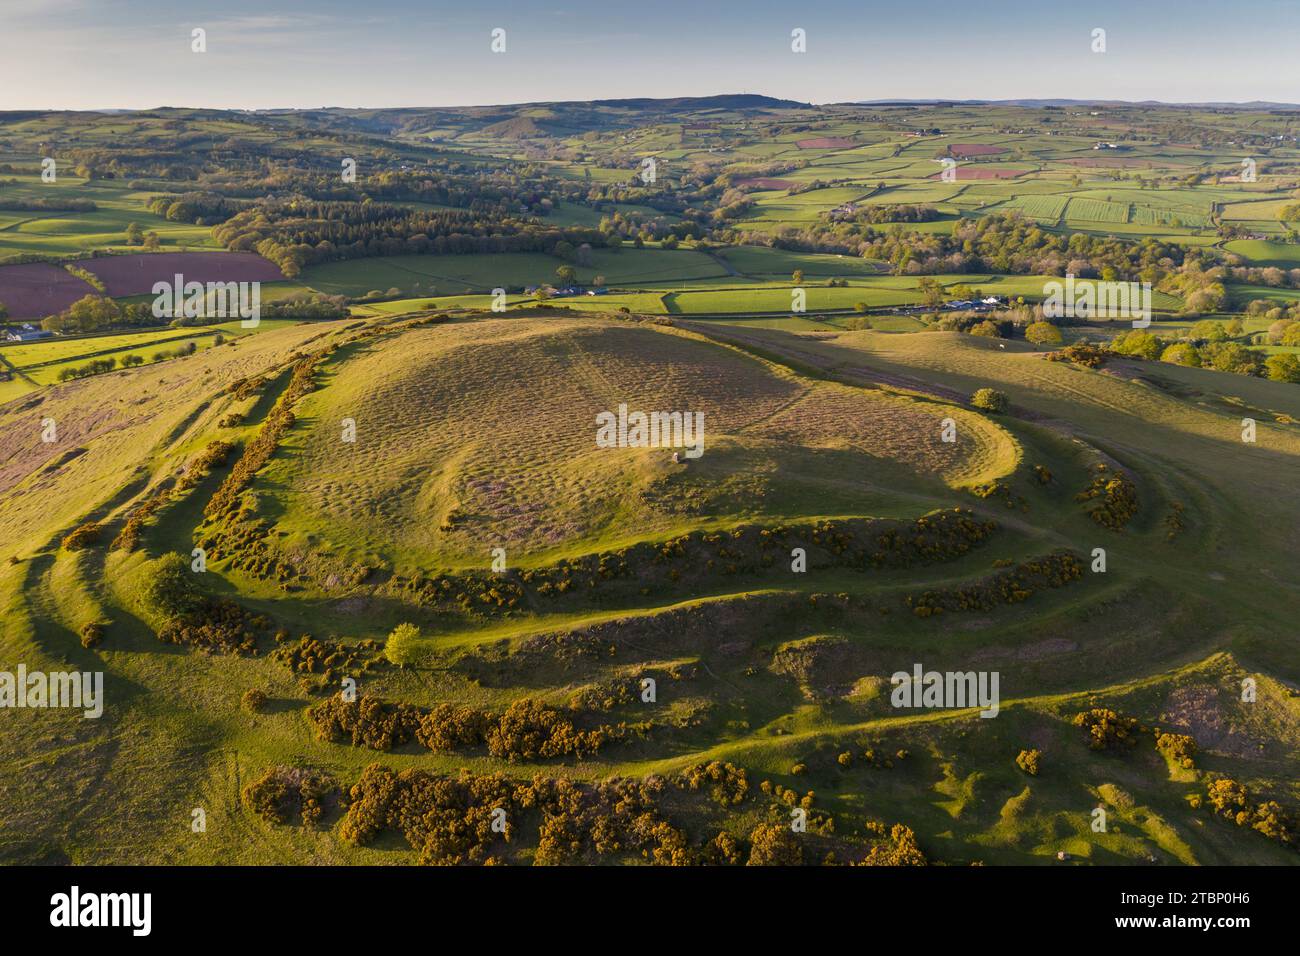 Aerial view of Pen-y-Crug Iron Age Hillfort near Brecon in Bannau Brycheiniog formerly known as the Brecon Beacons National Park, Powys, Wales, UK. Stock Photo